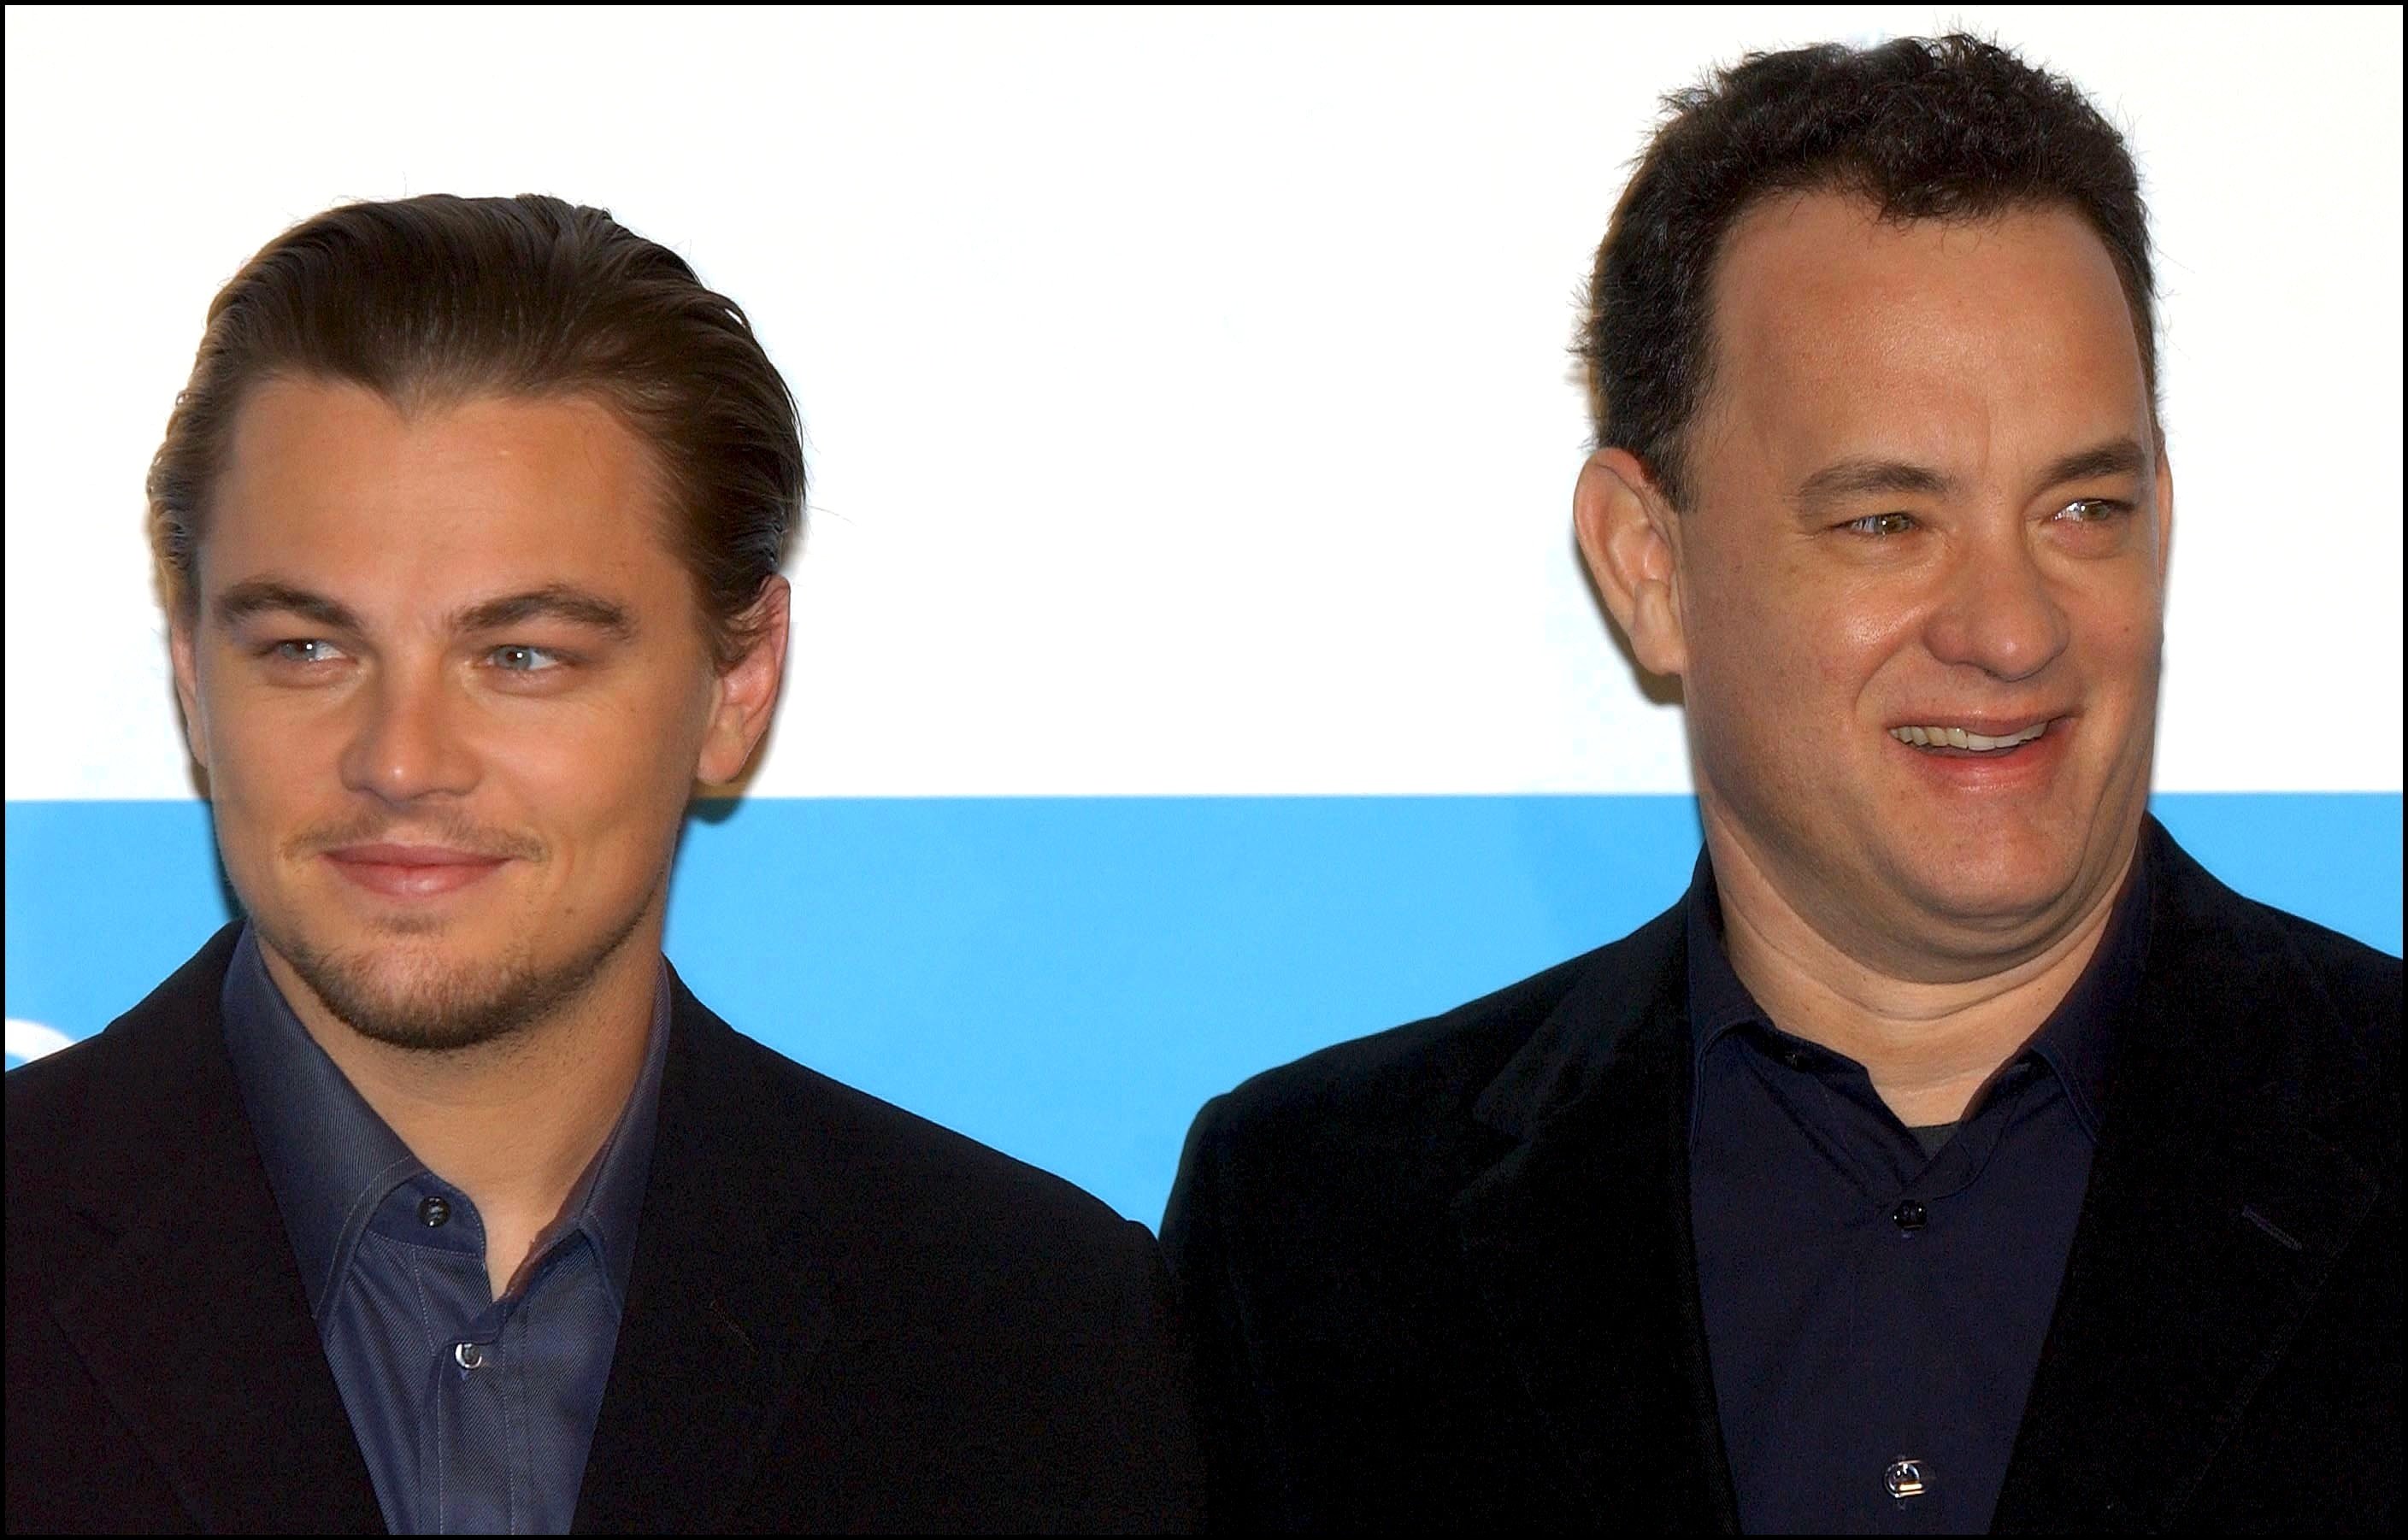 Leonardo DiCaprio and Tom Hanks at the Catch Me If You Can premiere